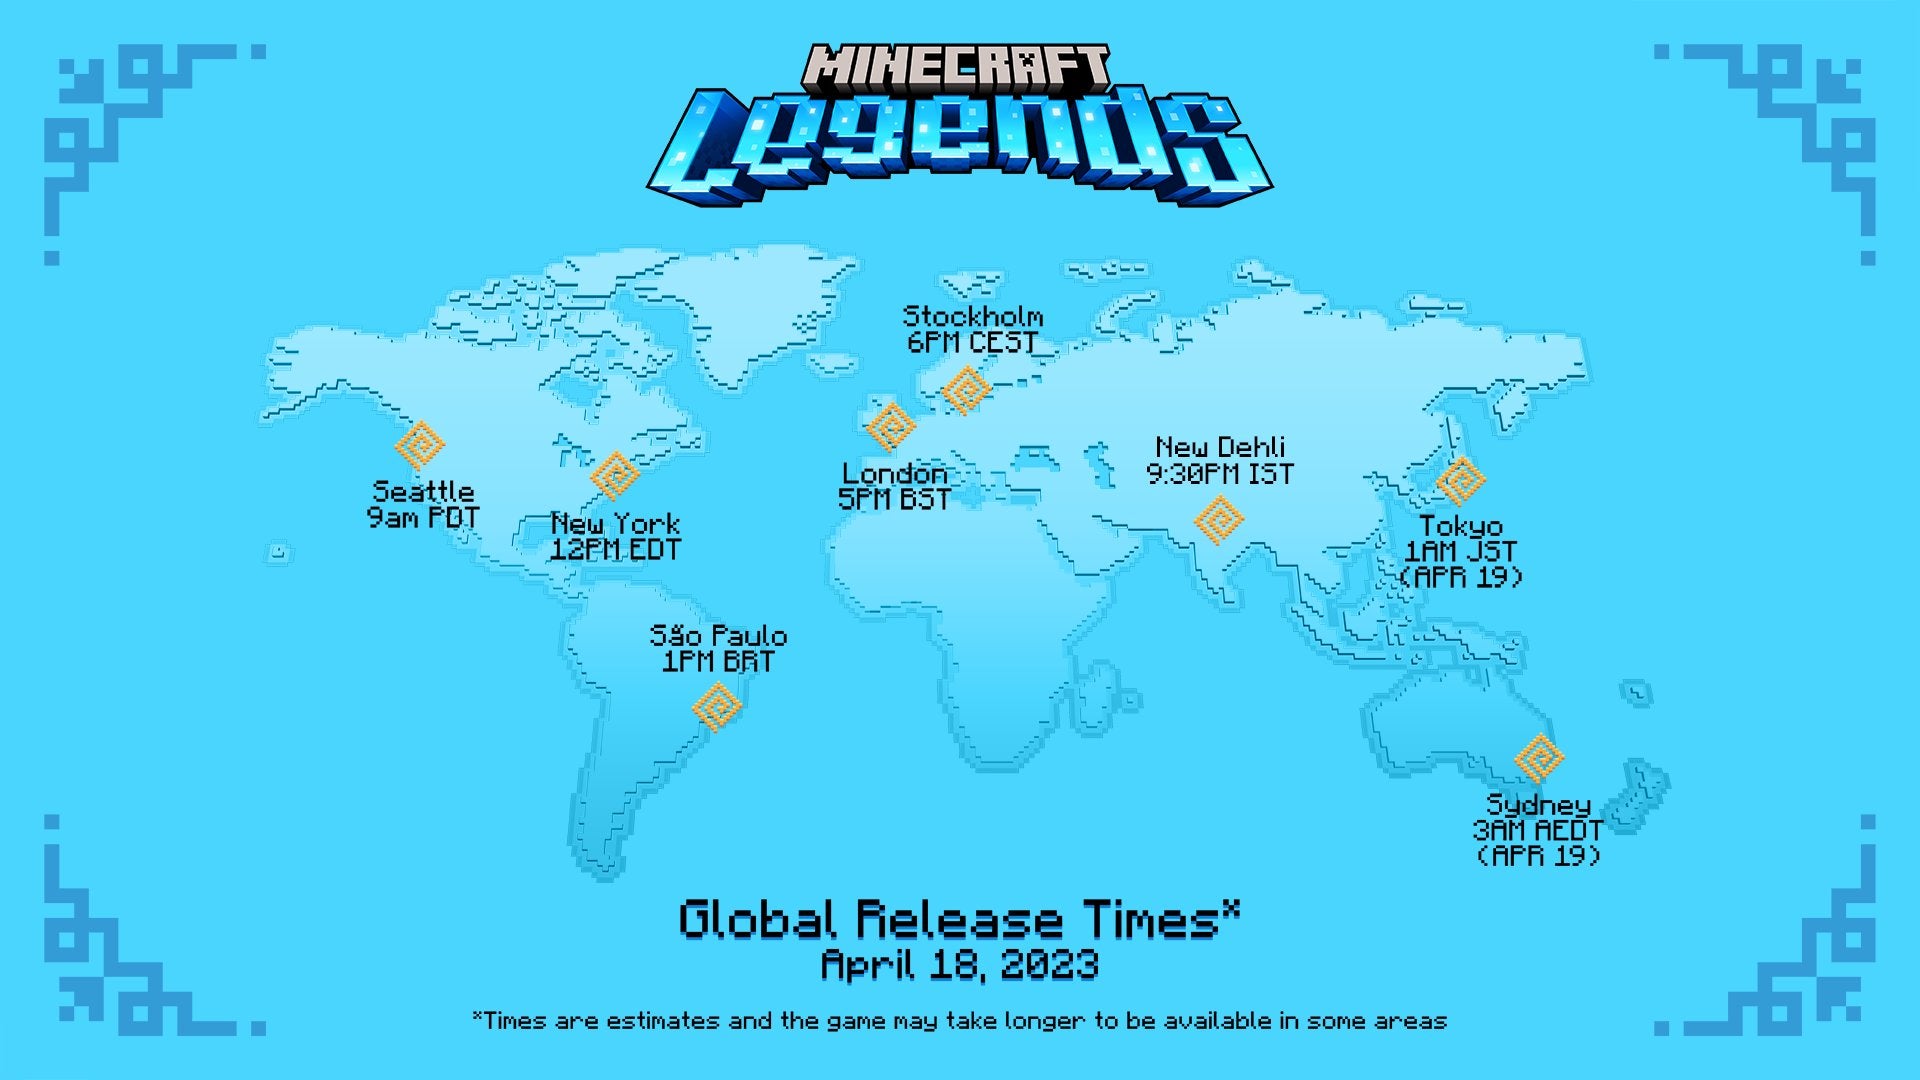 Image for Minecraft Legends release times for all regions